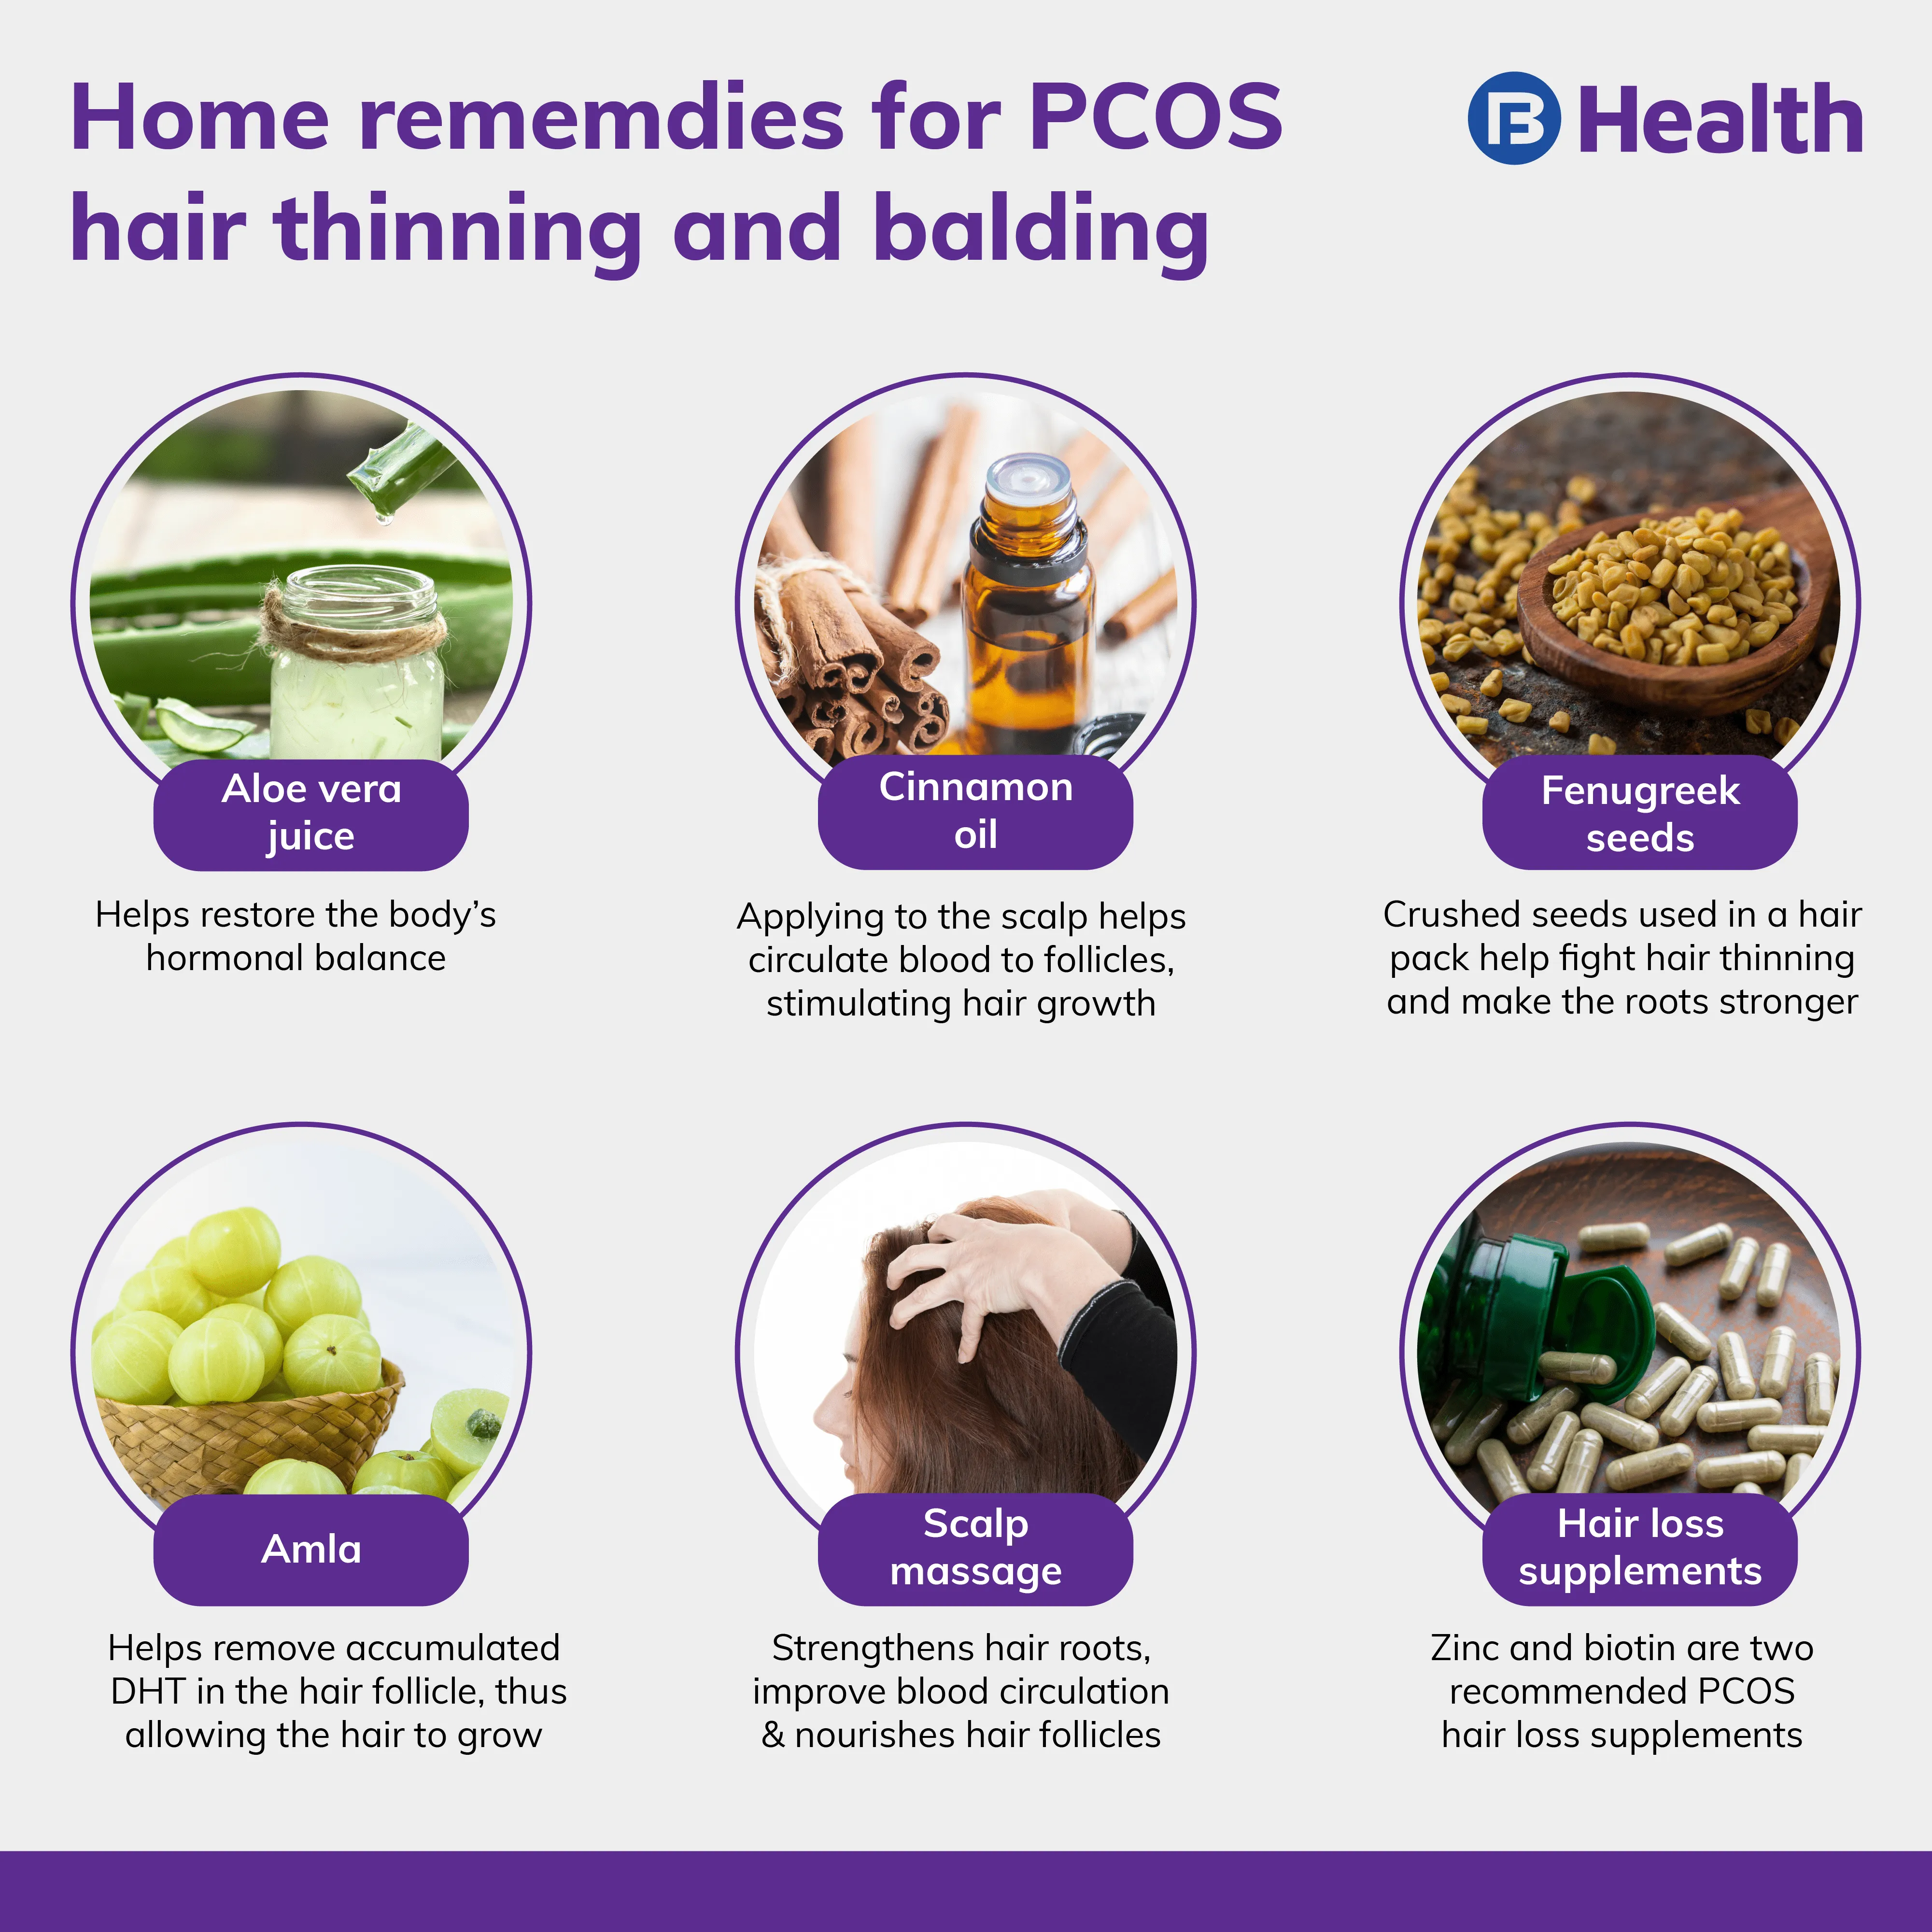 PCOS Hair Loss: Causes, Home Remedies and Treatment